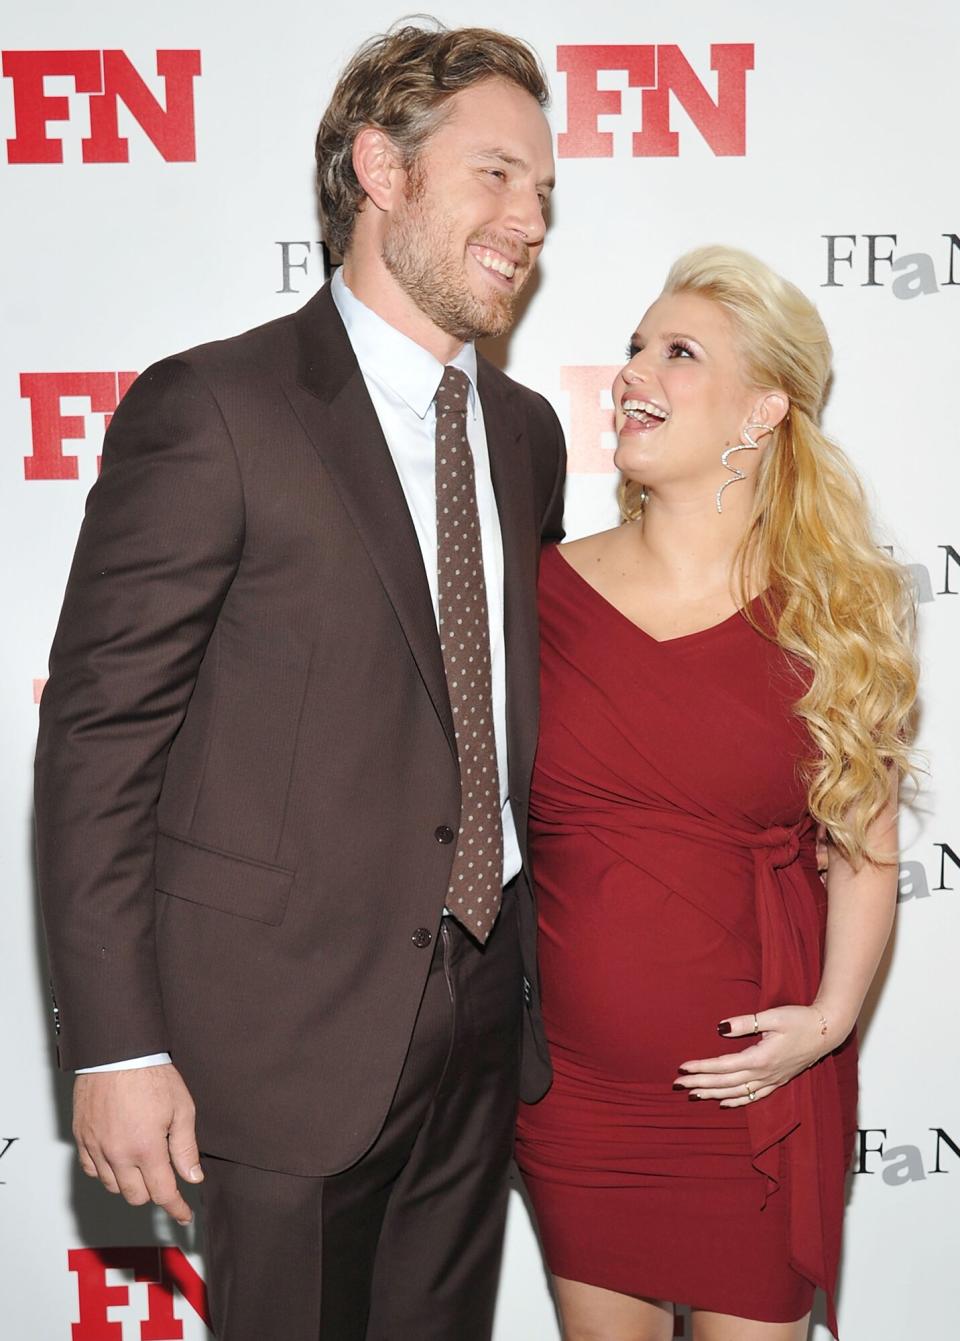 Eric Johnson (L) and recording artist/actress Jessica Simpson attend the 25th Annual Footwear News Achievement Awards at the Museum of Modern Art on November 29, 2011 in New York City